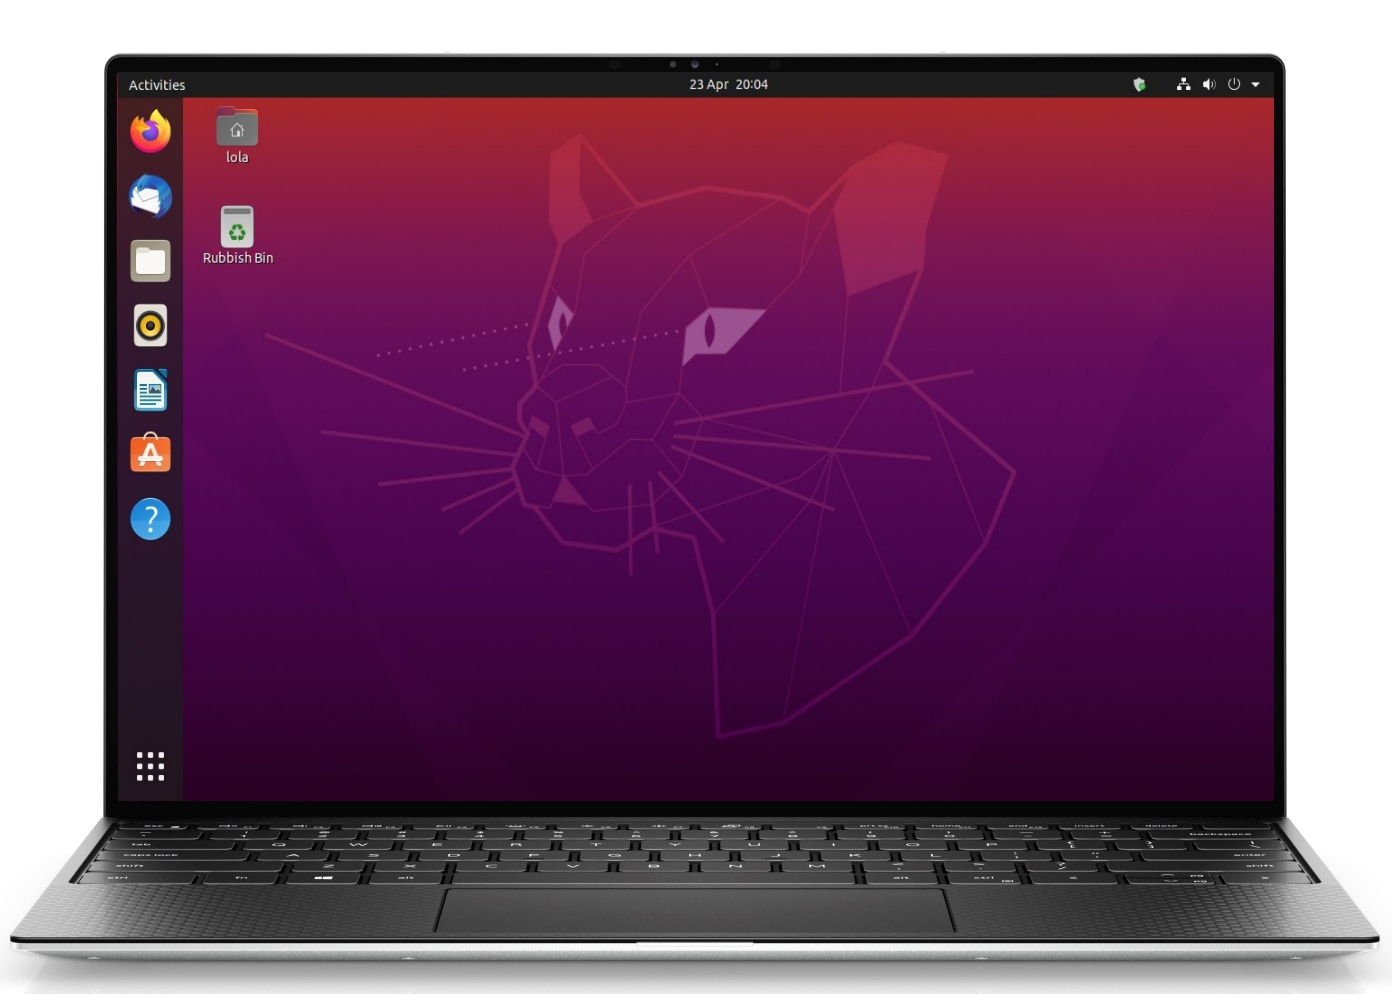 Dell XPS 13 Developer Edition Linux Laptop Is Now Available with Ubuntu 20.04 LTS